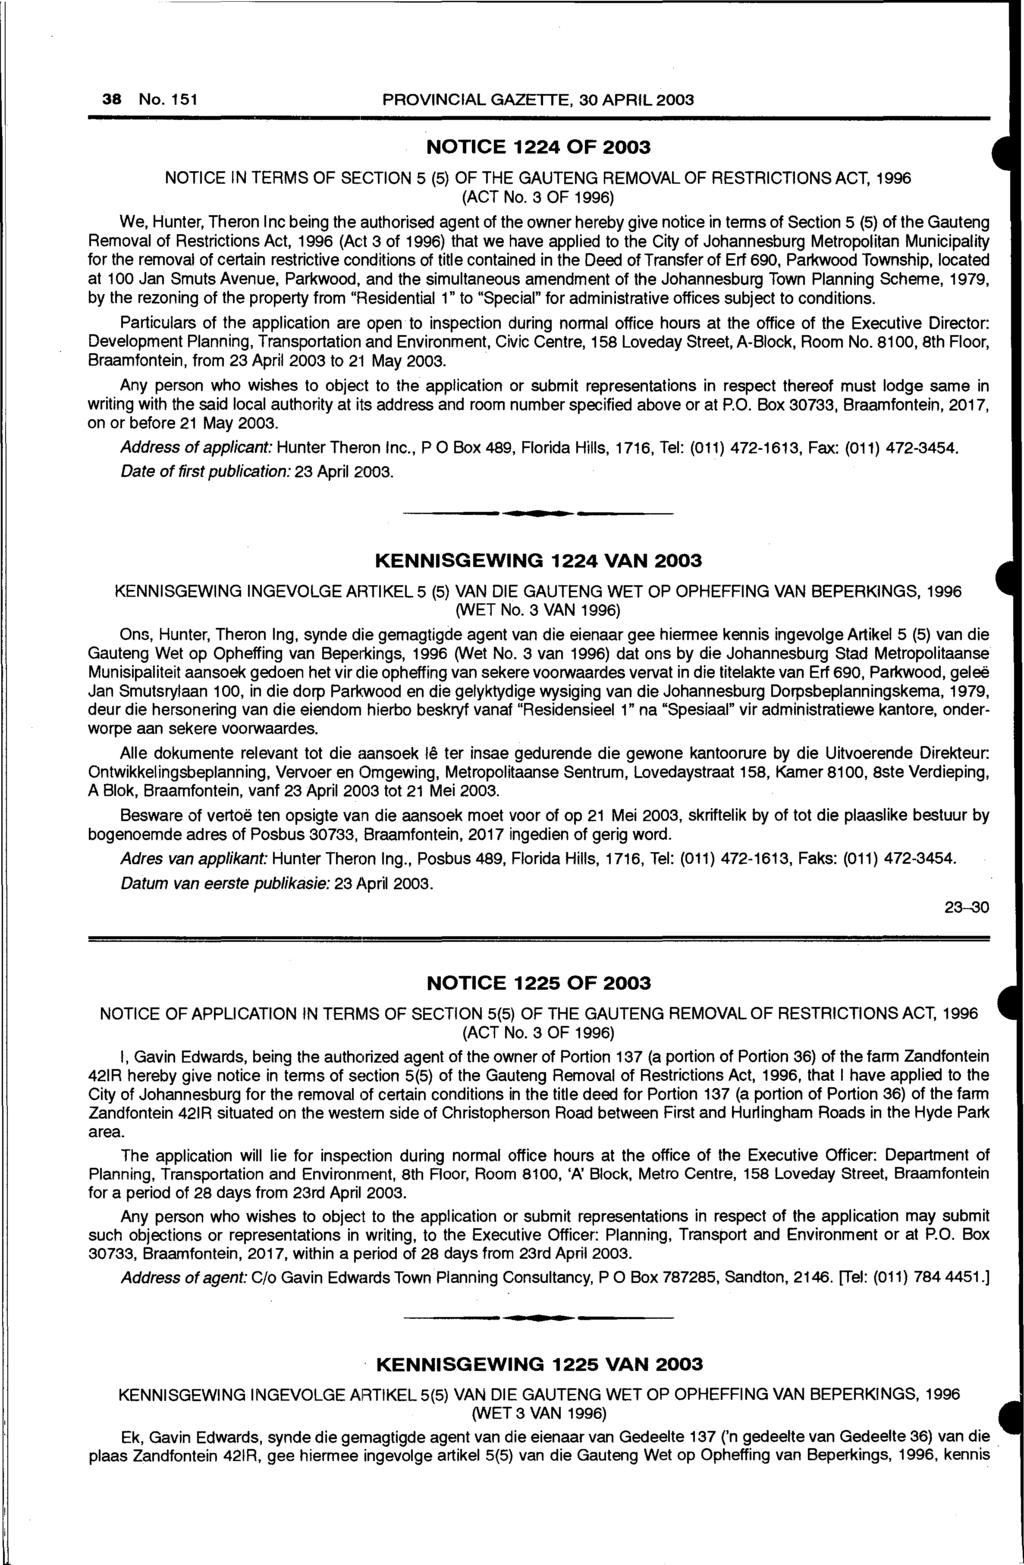 38 No. 151 PROVINCIAL GAZETTE, 30 APRIL 2003 NOTICE 1224 OF 2003 NOTICE IN TERMS OF SECTION 5 (5) OF THE GAUTENG REMOVAL OF RESTRICTIONS ACT, 1996 (ACT No.